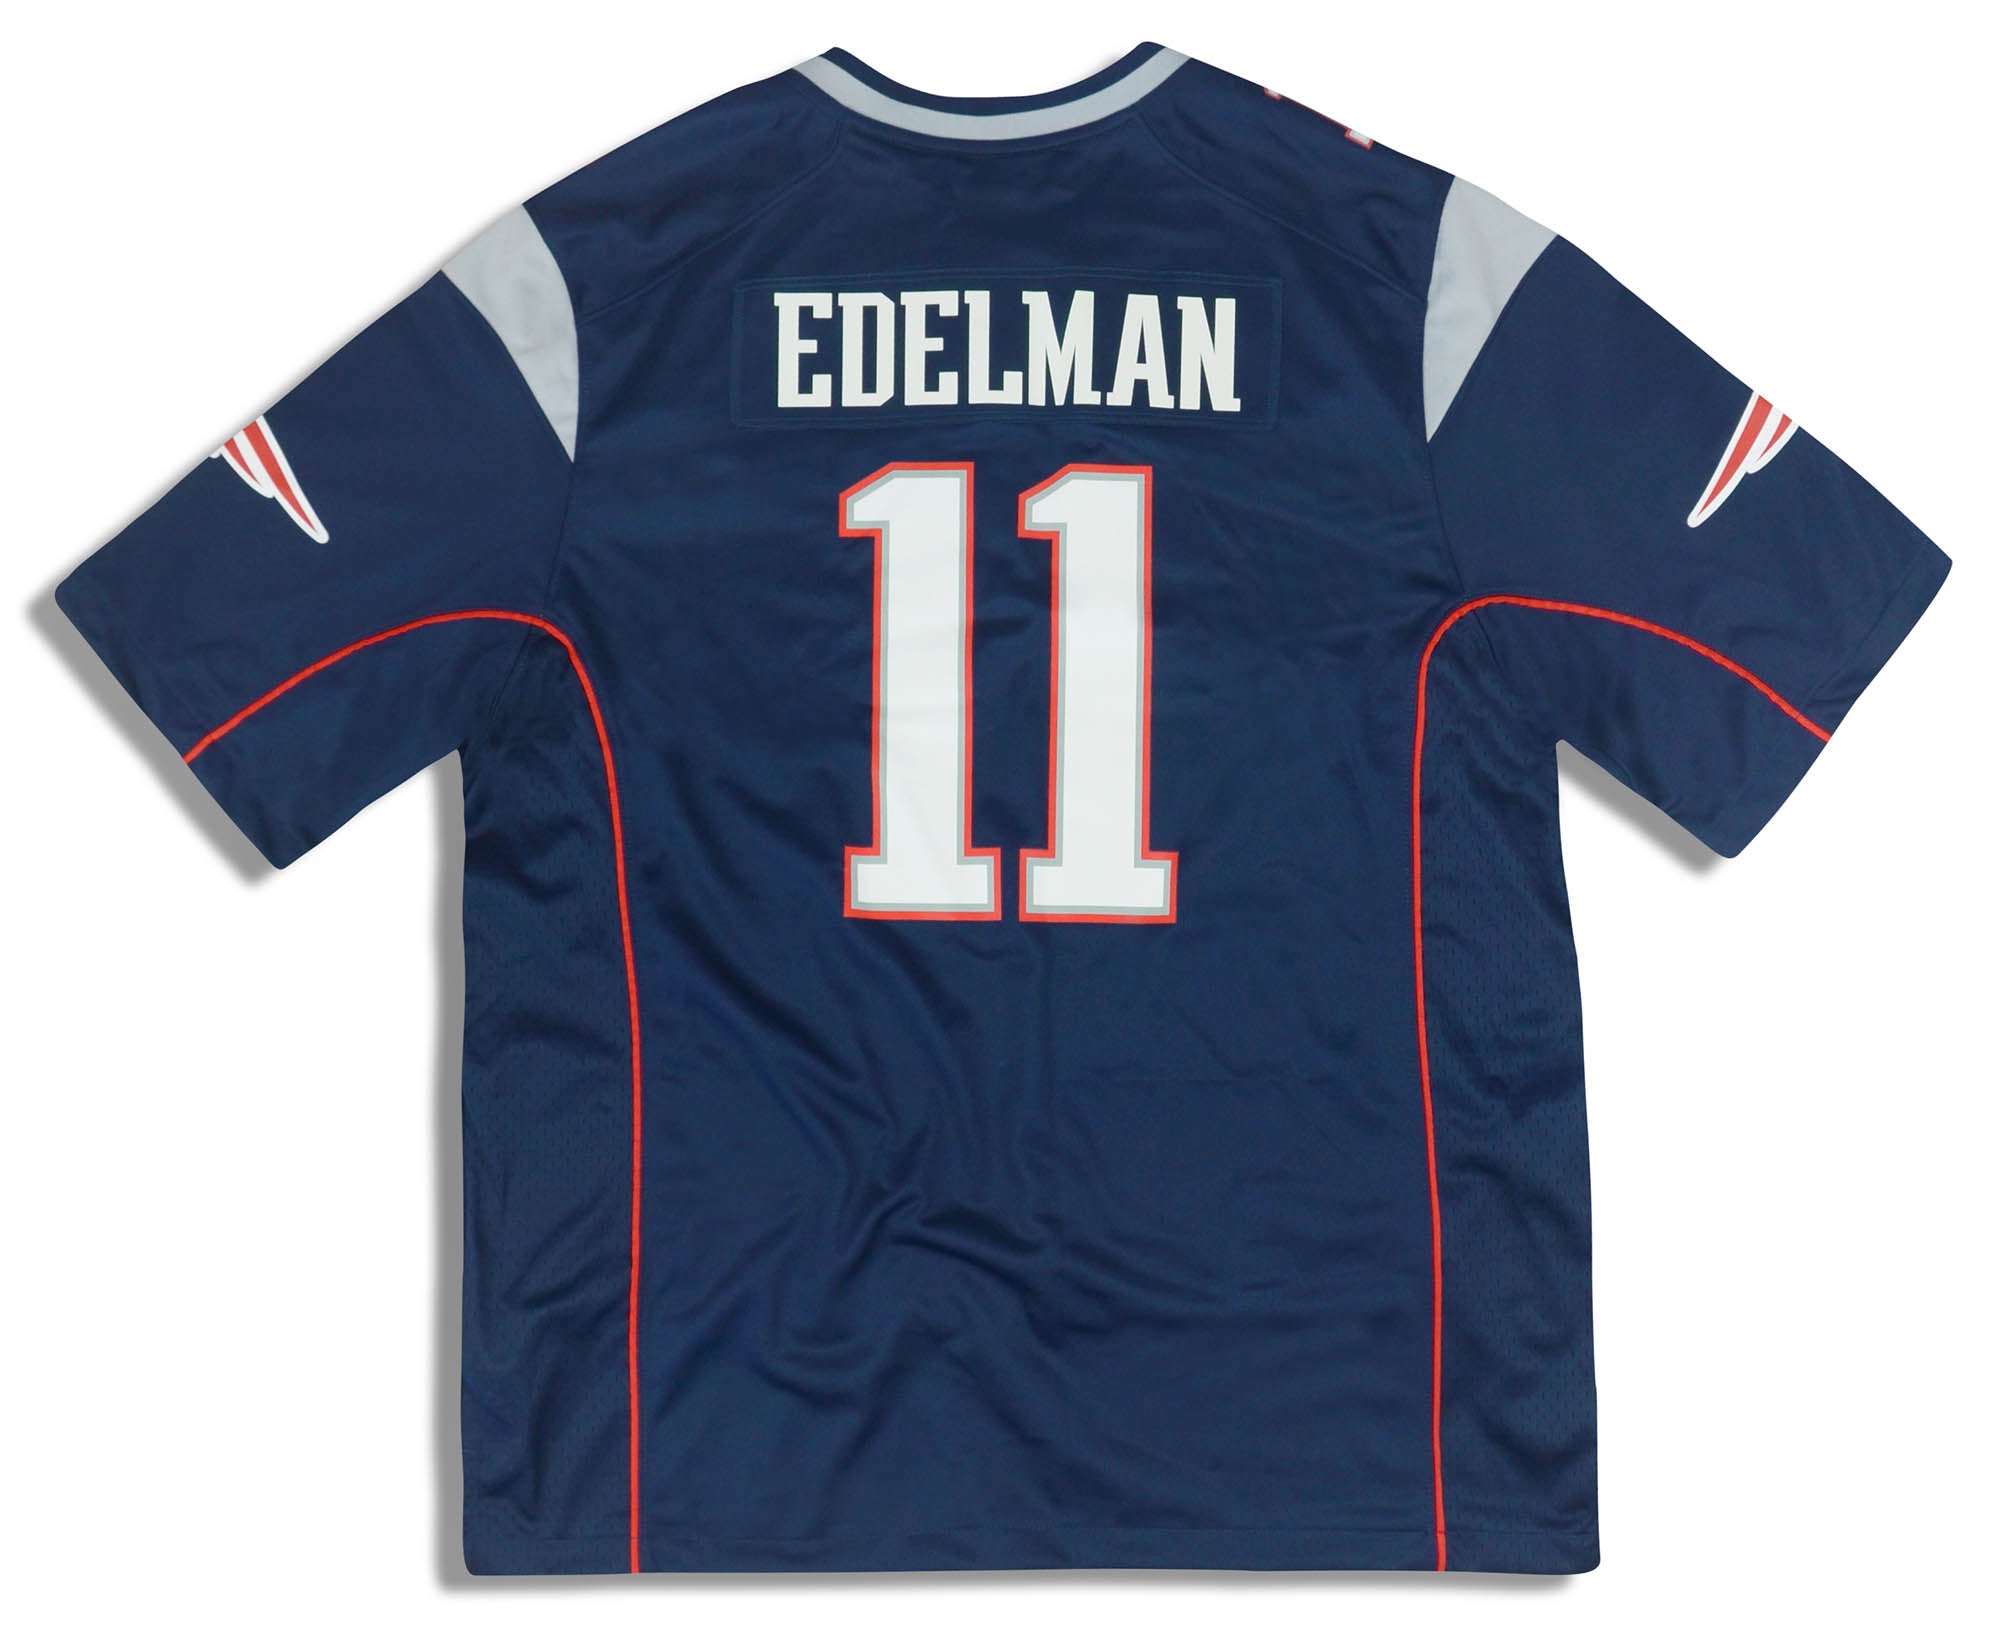 2018-19 NEW ENGLAND PATRIOTS EDELMAN #11 NIKE GAME JERSEY (HOME) XL - W/TAGS